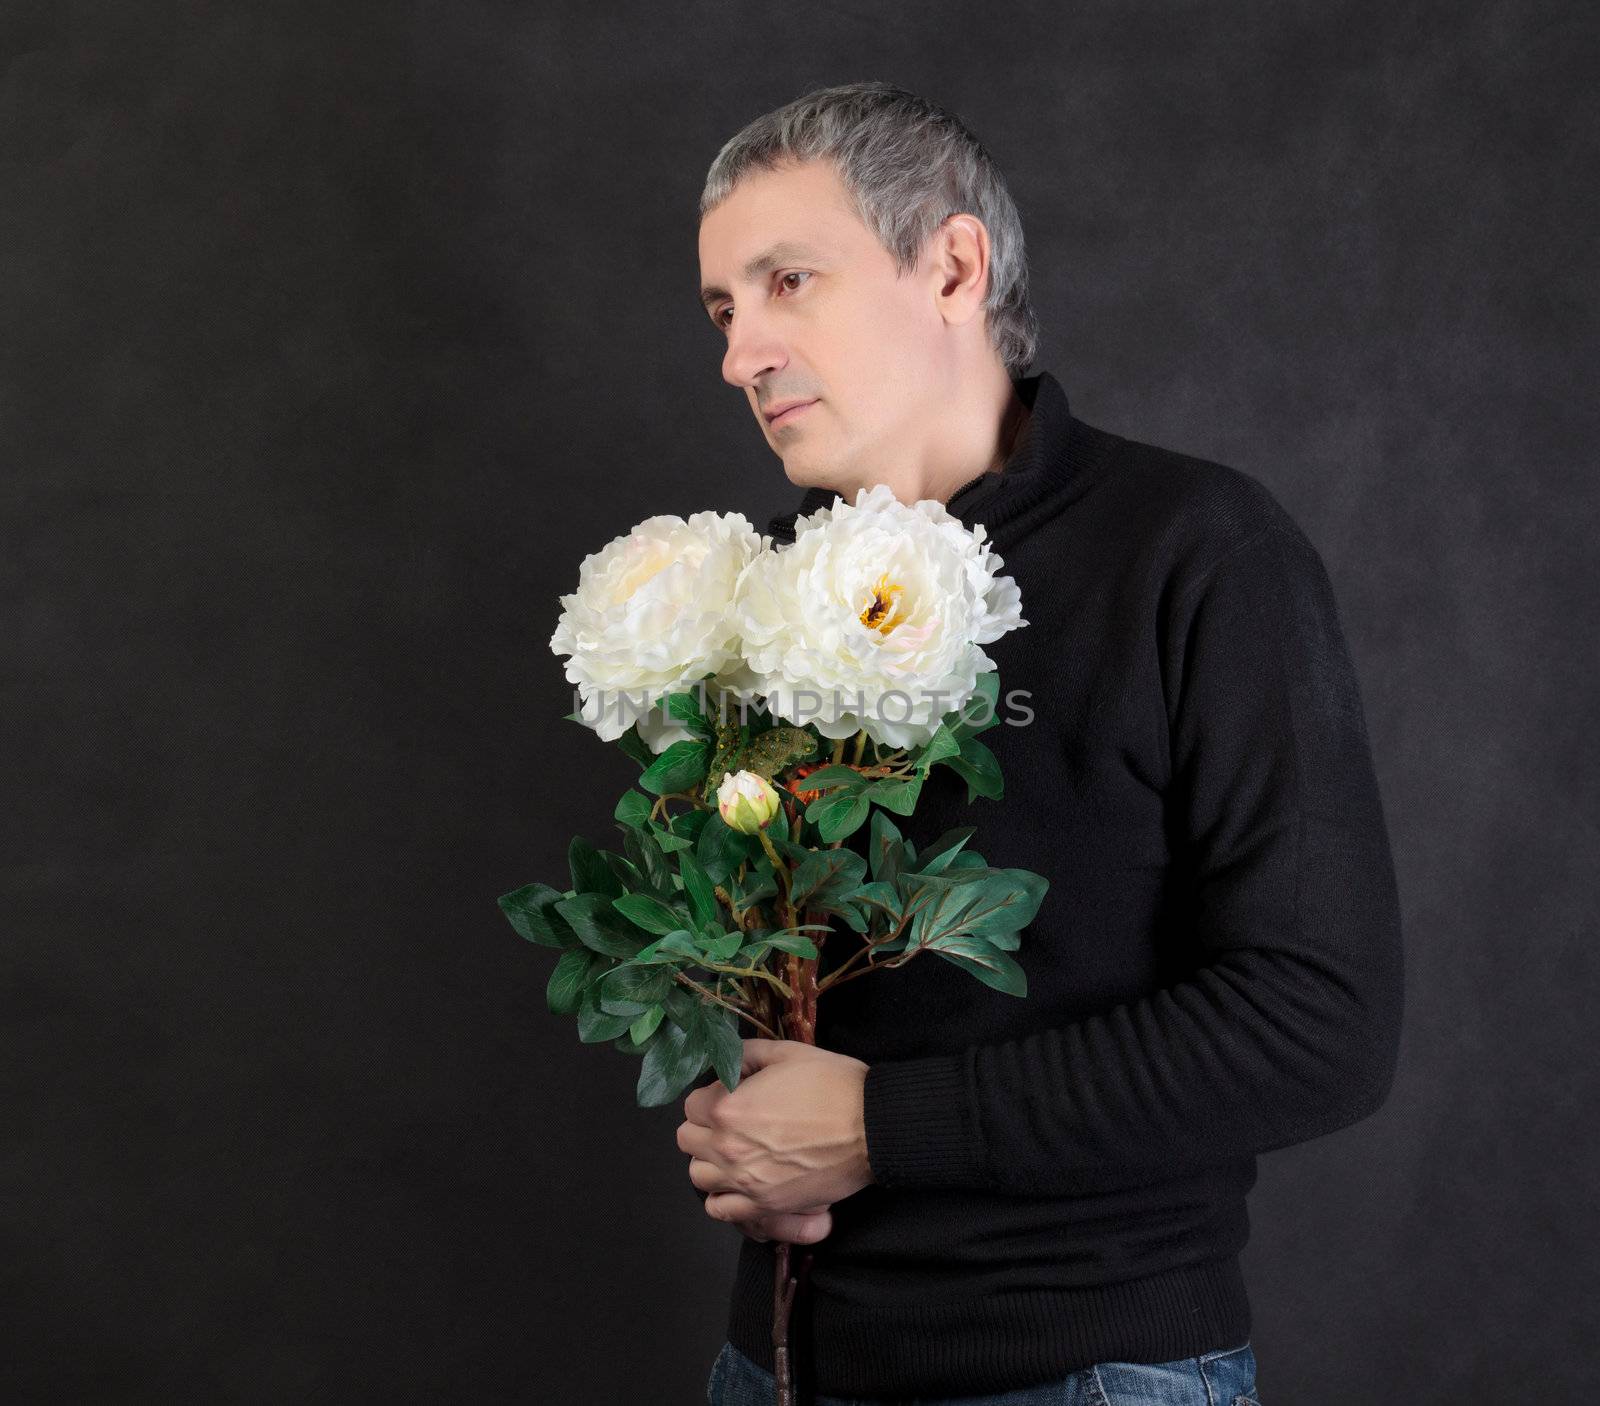 Man holding a bouquet of flowers by Discovod